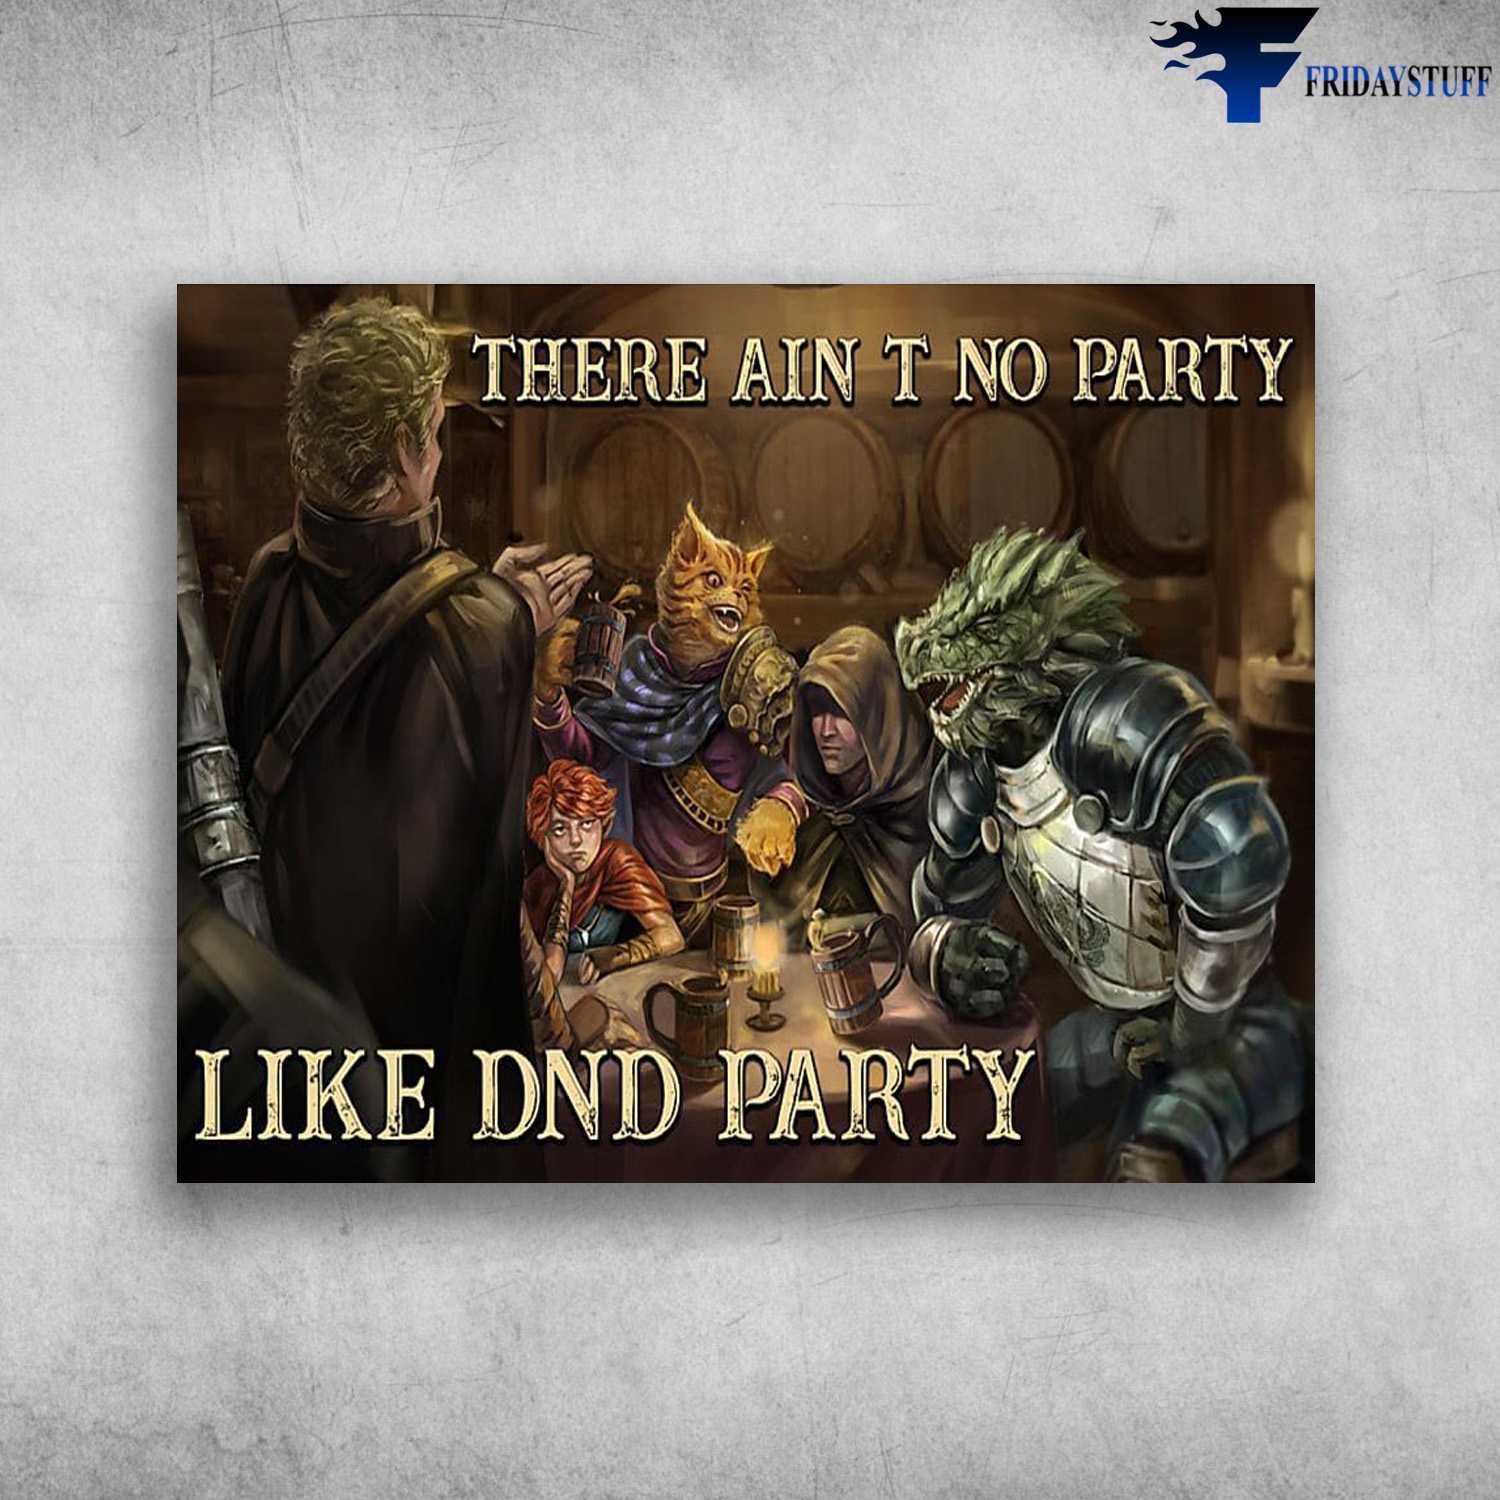 DND Party Poster, Dungeons & Dragons There Ain't No Party, Like DND Party